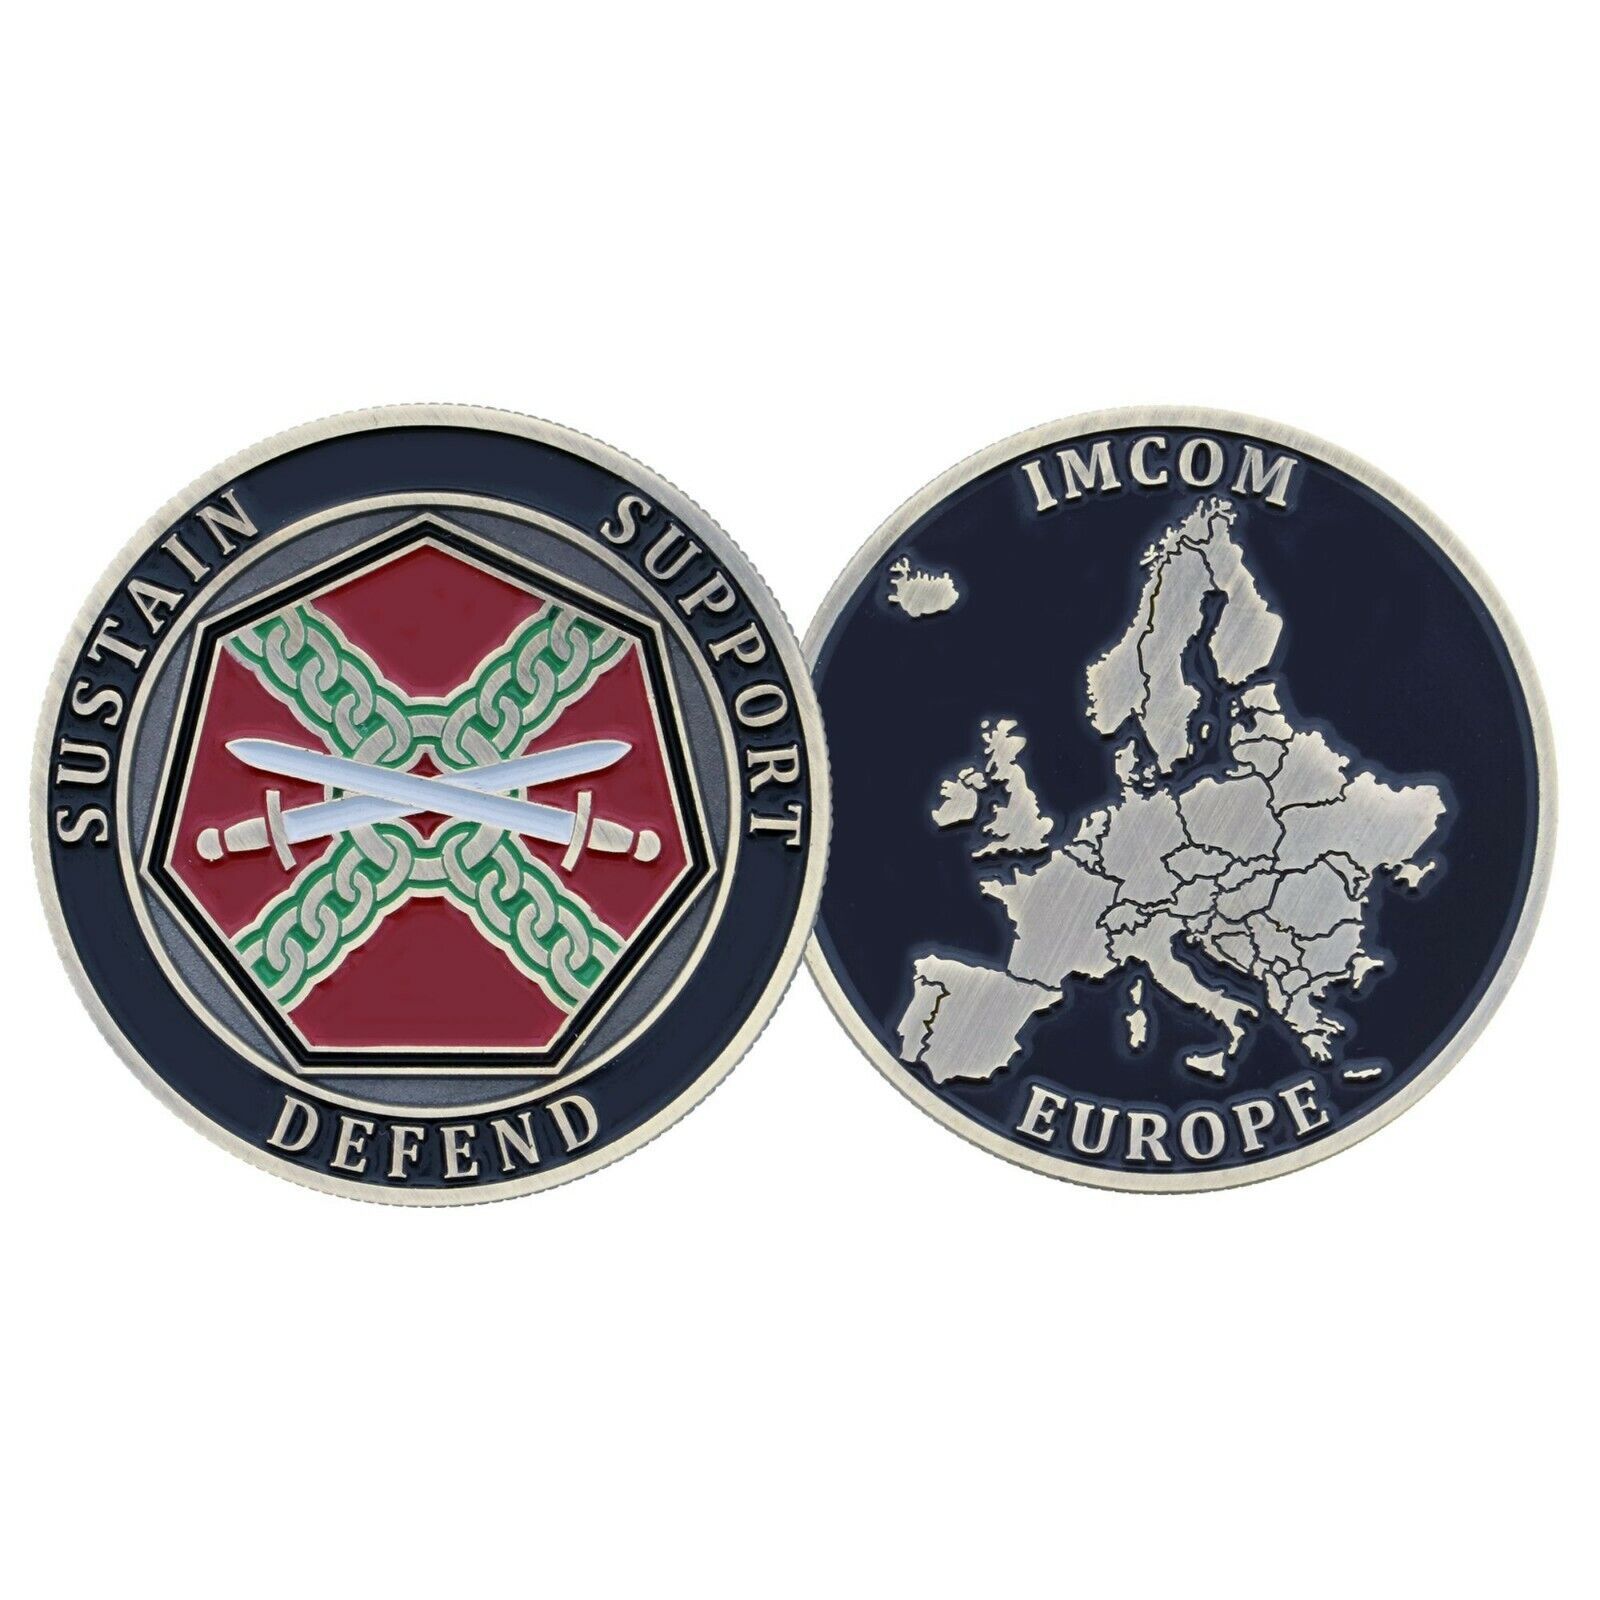 Primary image for ARMY IMCOM EUROPE 1.75" CHALLENGE COIN